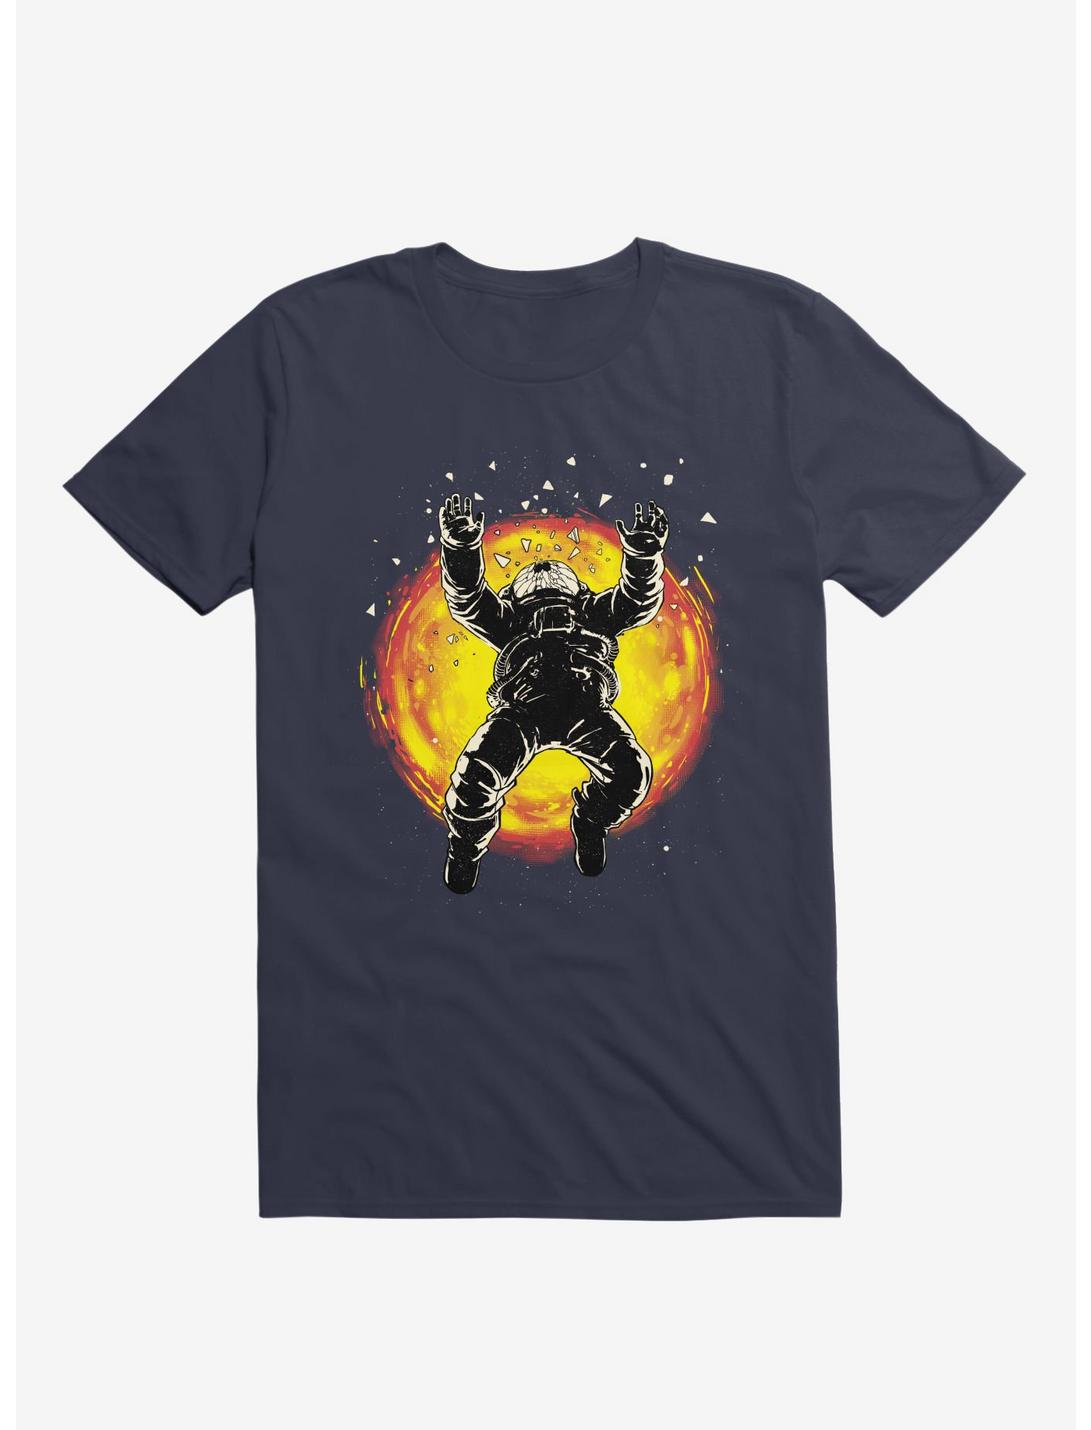 Astronaut Lost In The Space Navy Blue T-Shirt, NAVY, hi-res